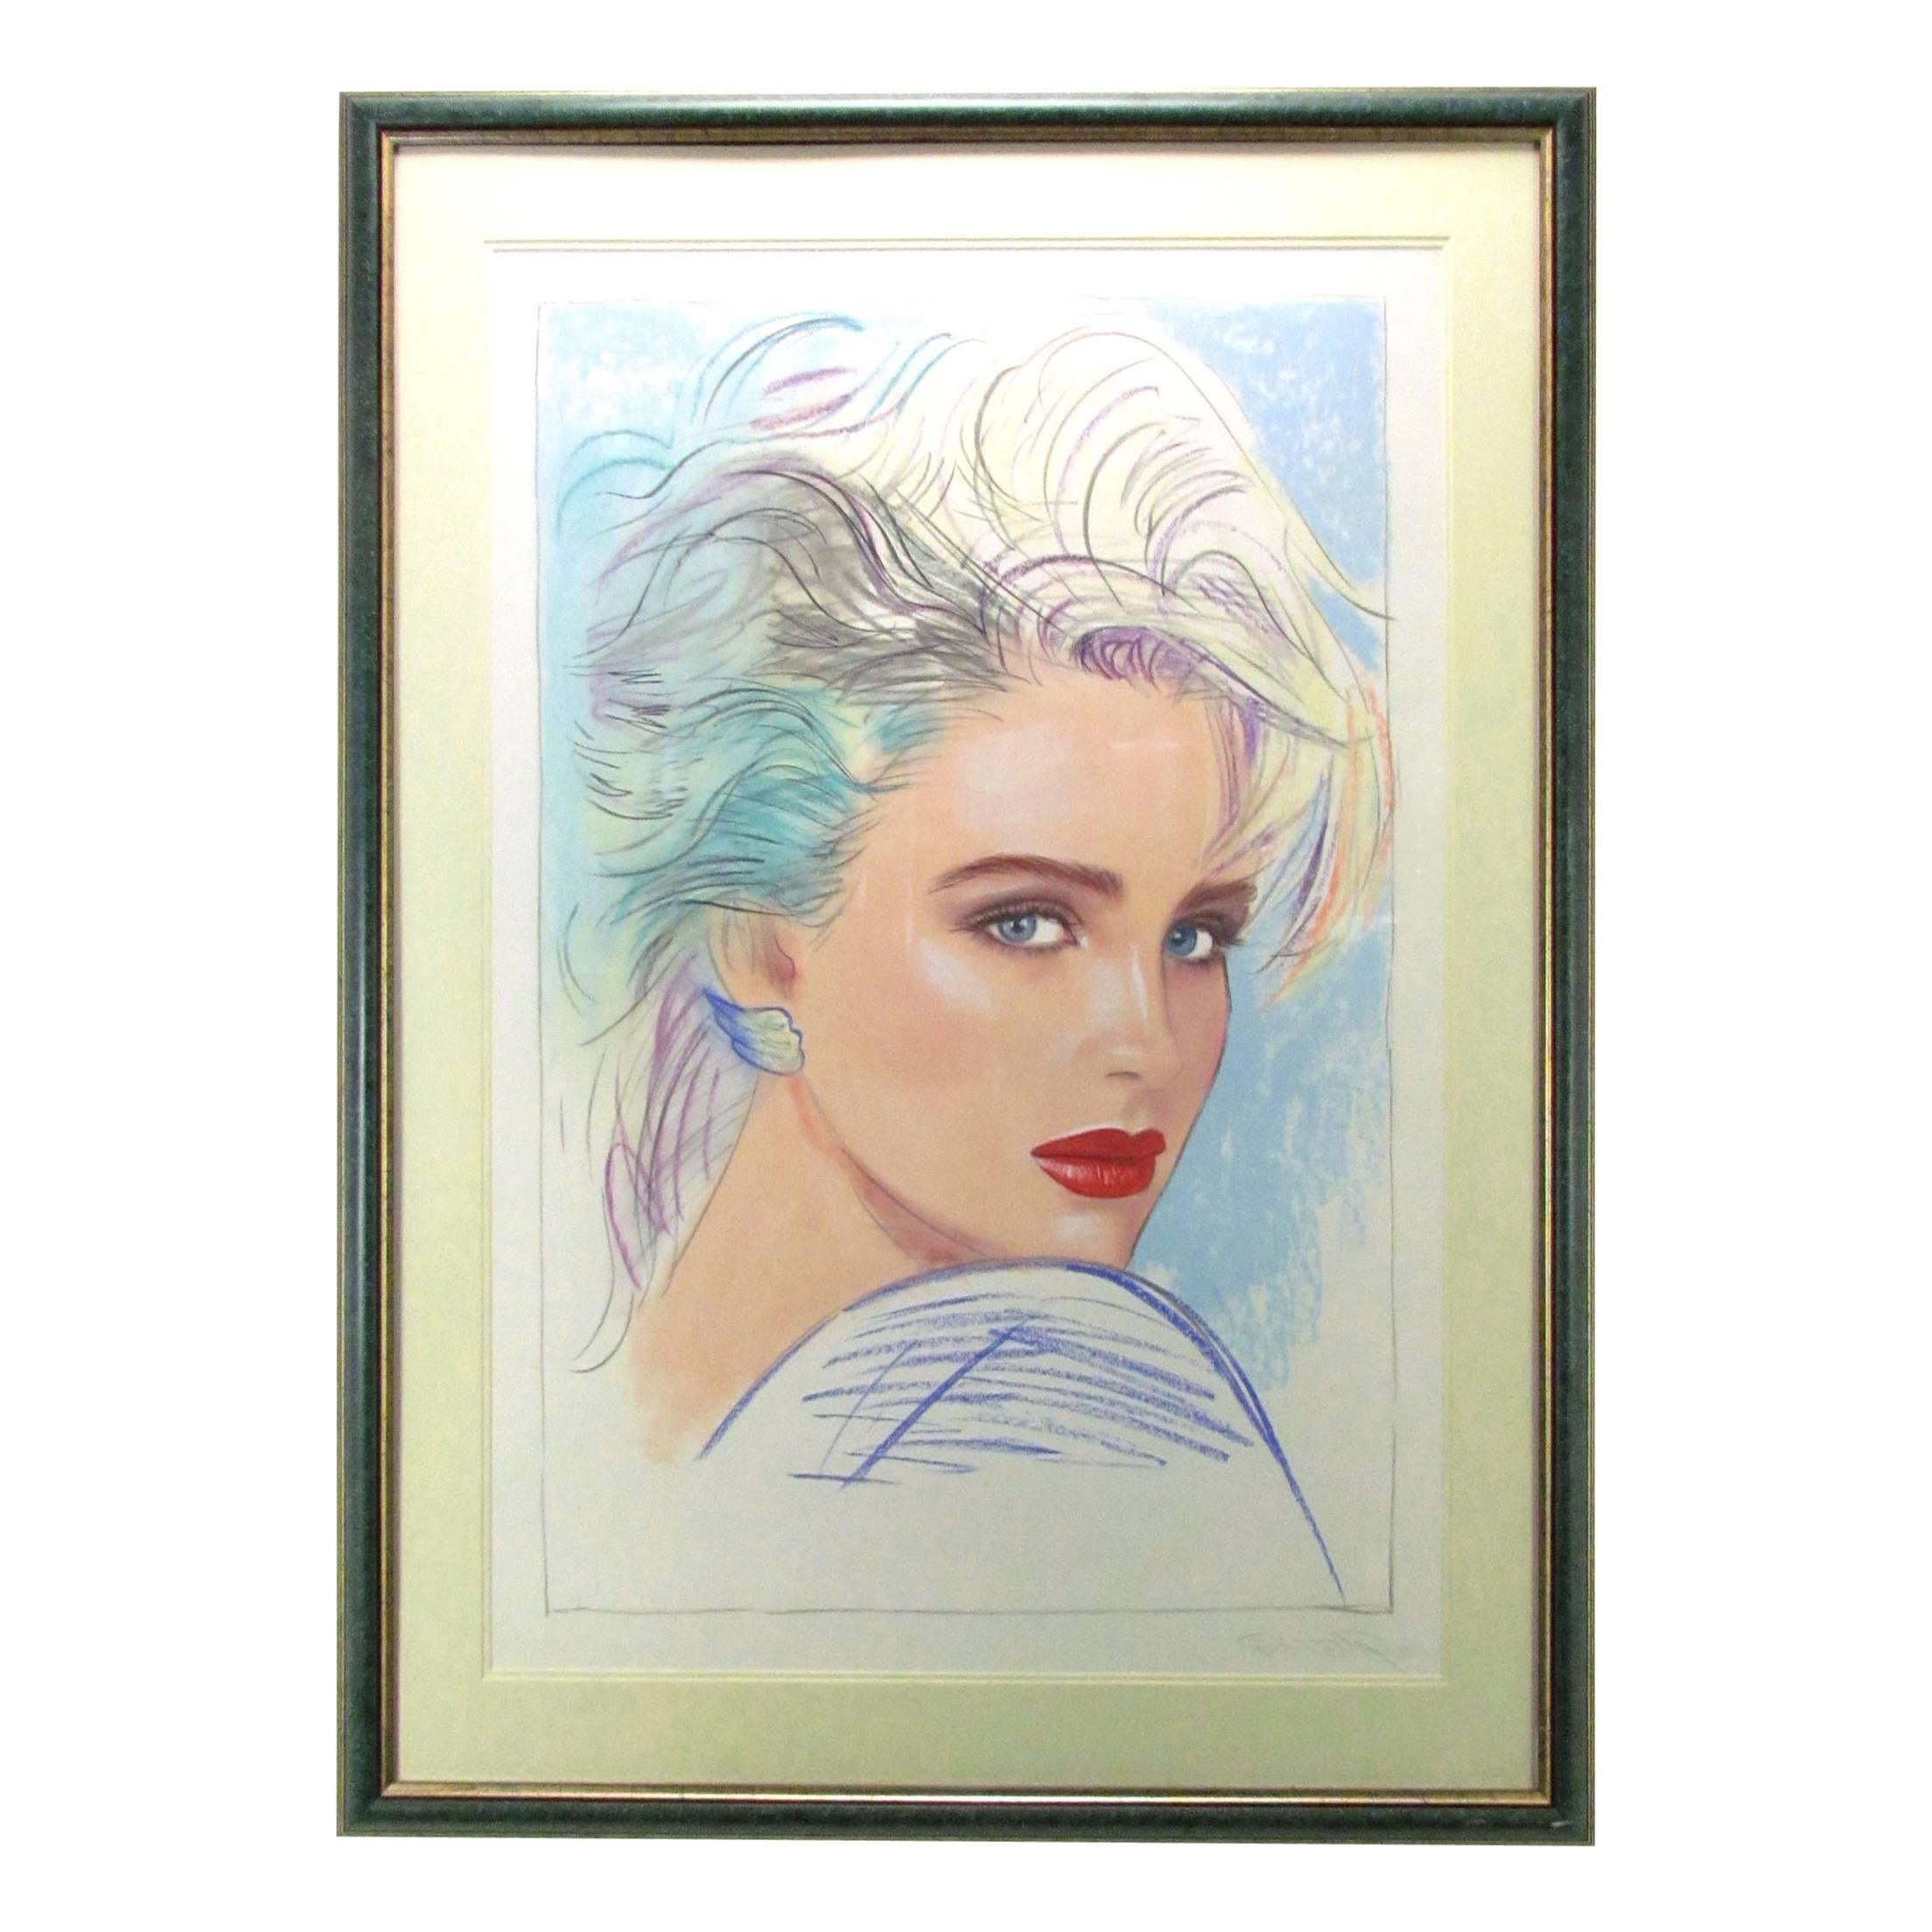 Original Pastel Painting by Renowned Japanese Artist Pater Sato, Dated 1992